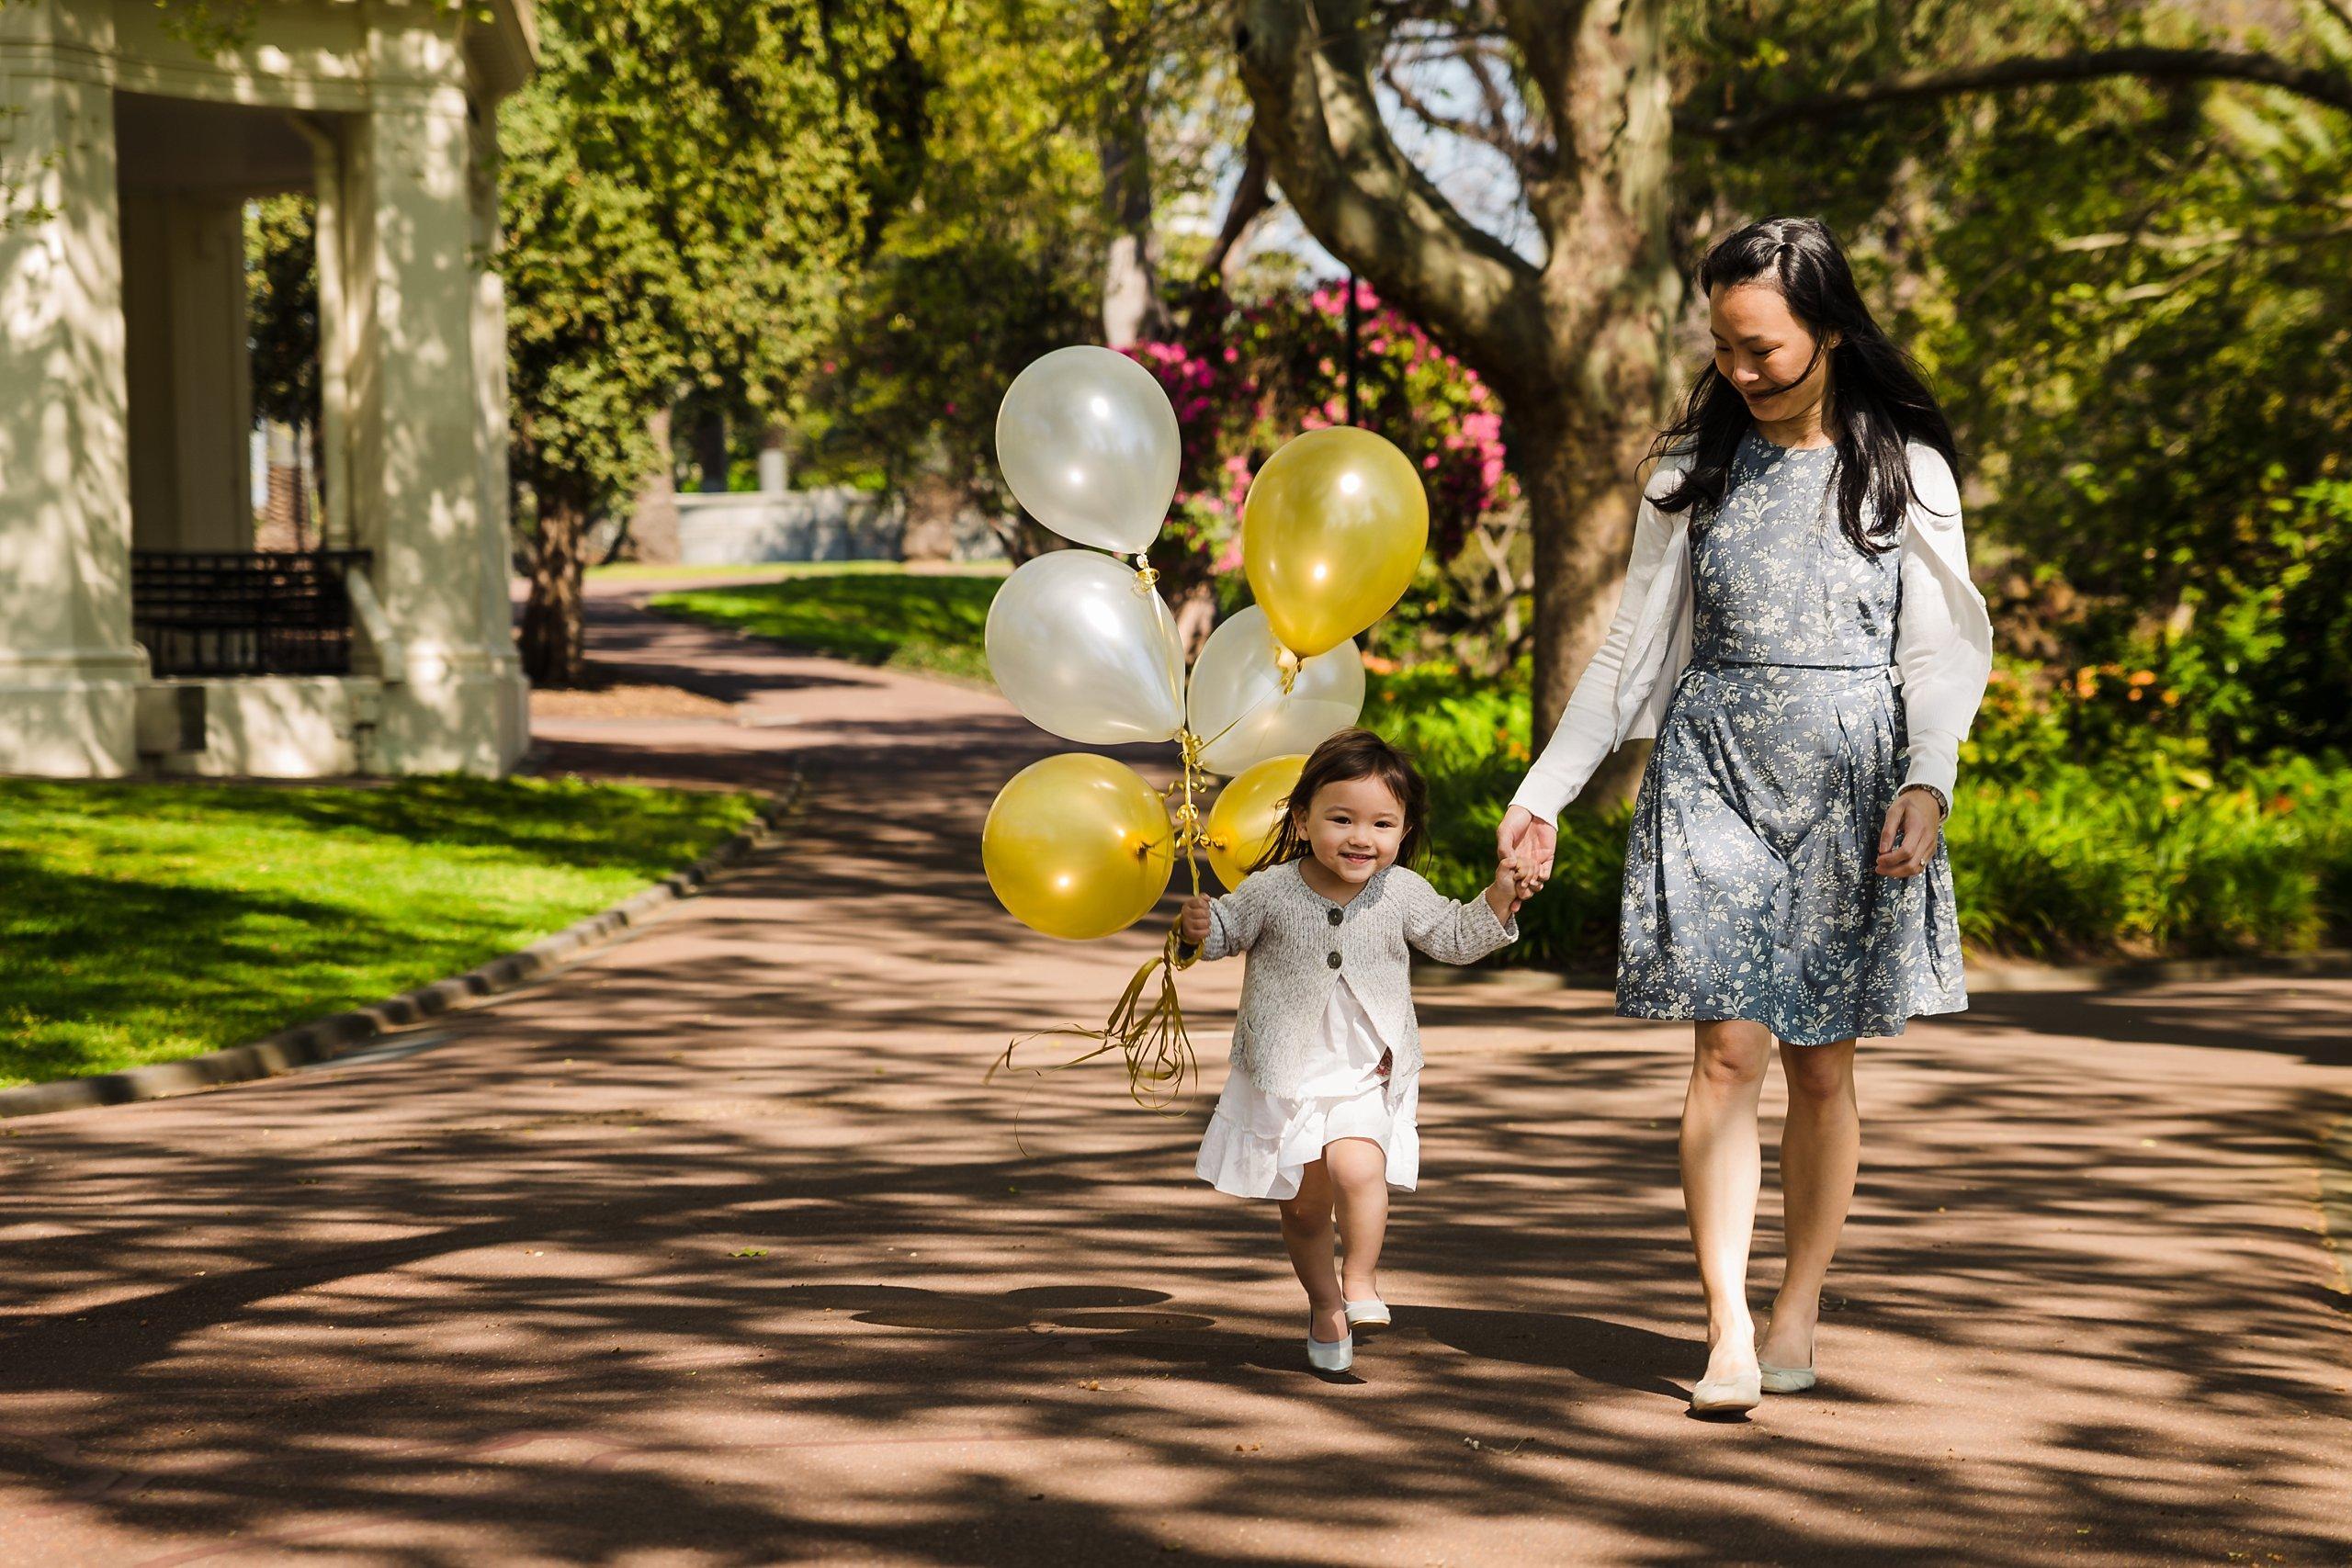 mother holding hands with her younge daughter with yellow and white ballons walking in queen victoria gardens